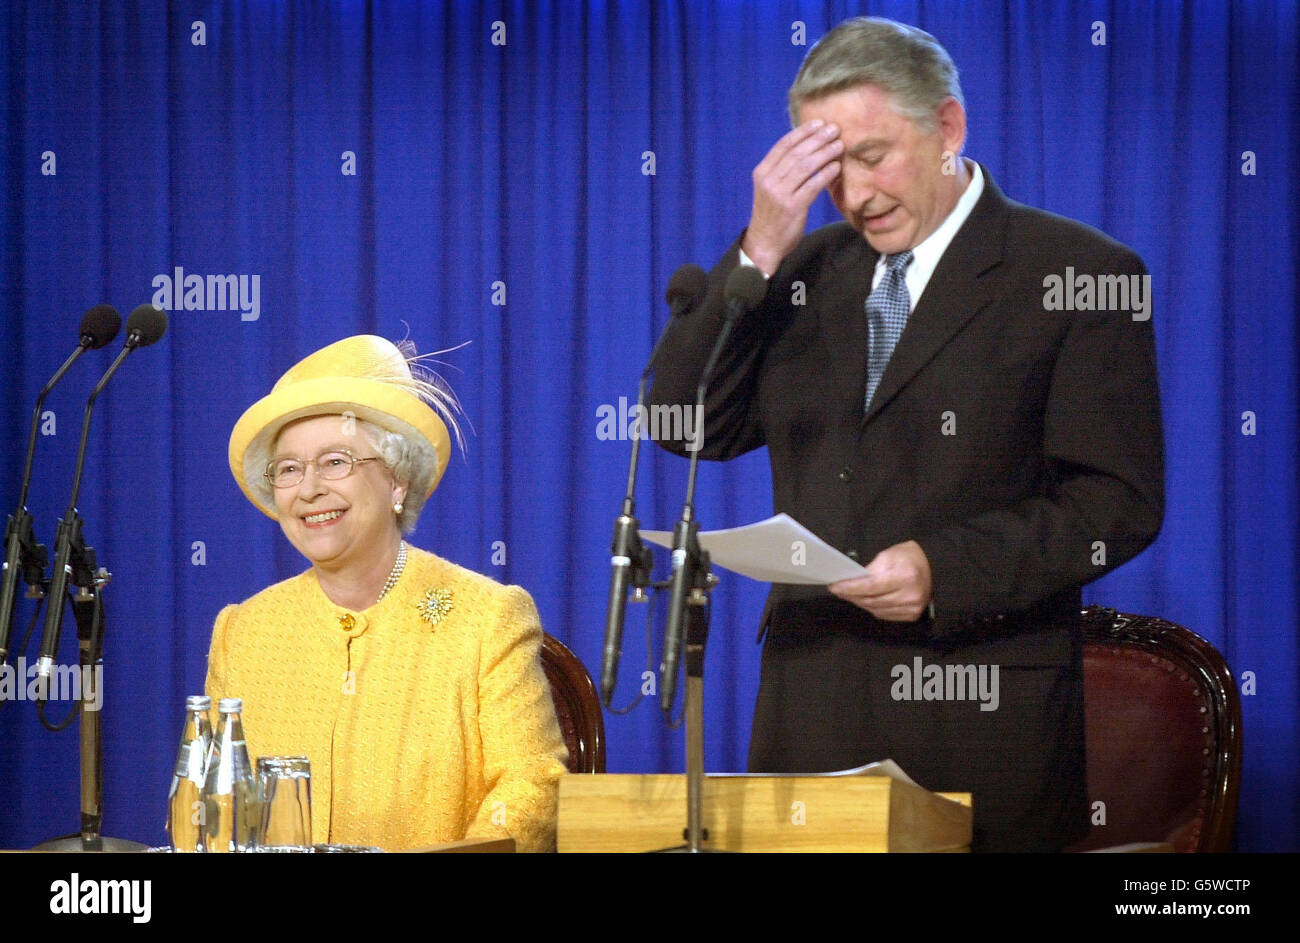 The Queen laughs as Presiding Officer Sir David Steel tells a joke from his schooldays at a special sitting of the Scottish Parliament at King's College Conference and Visitor Centre in Aberdeen, Scotland, as part of the continuing Golden Jubilee celebrations. Stock Photo